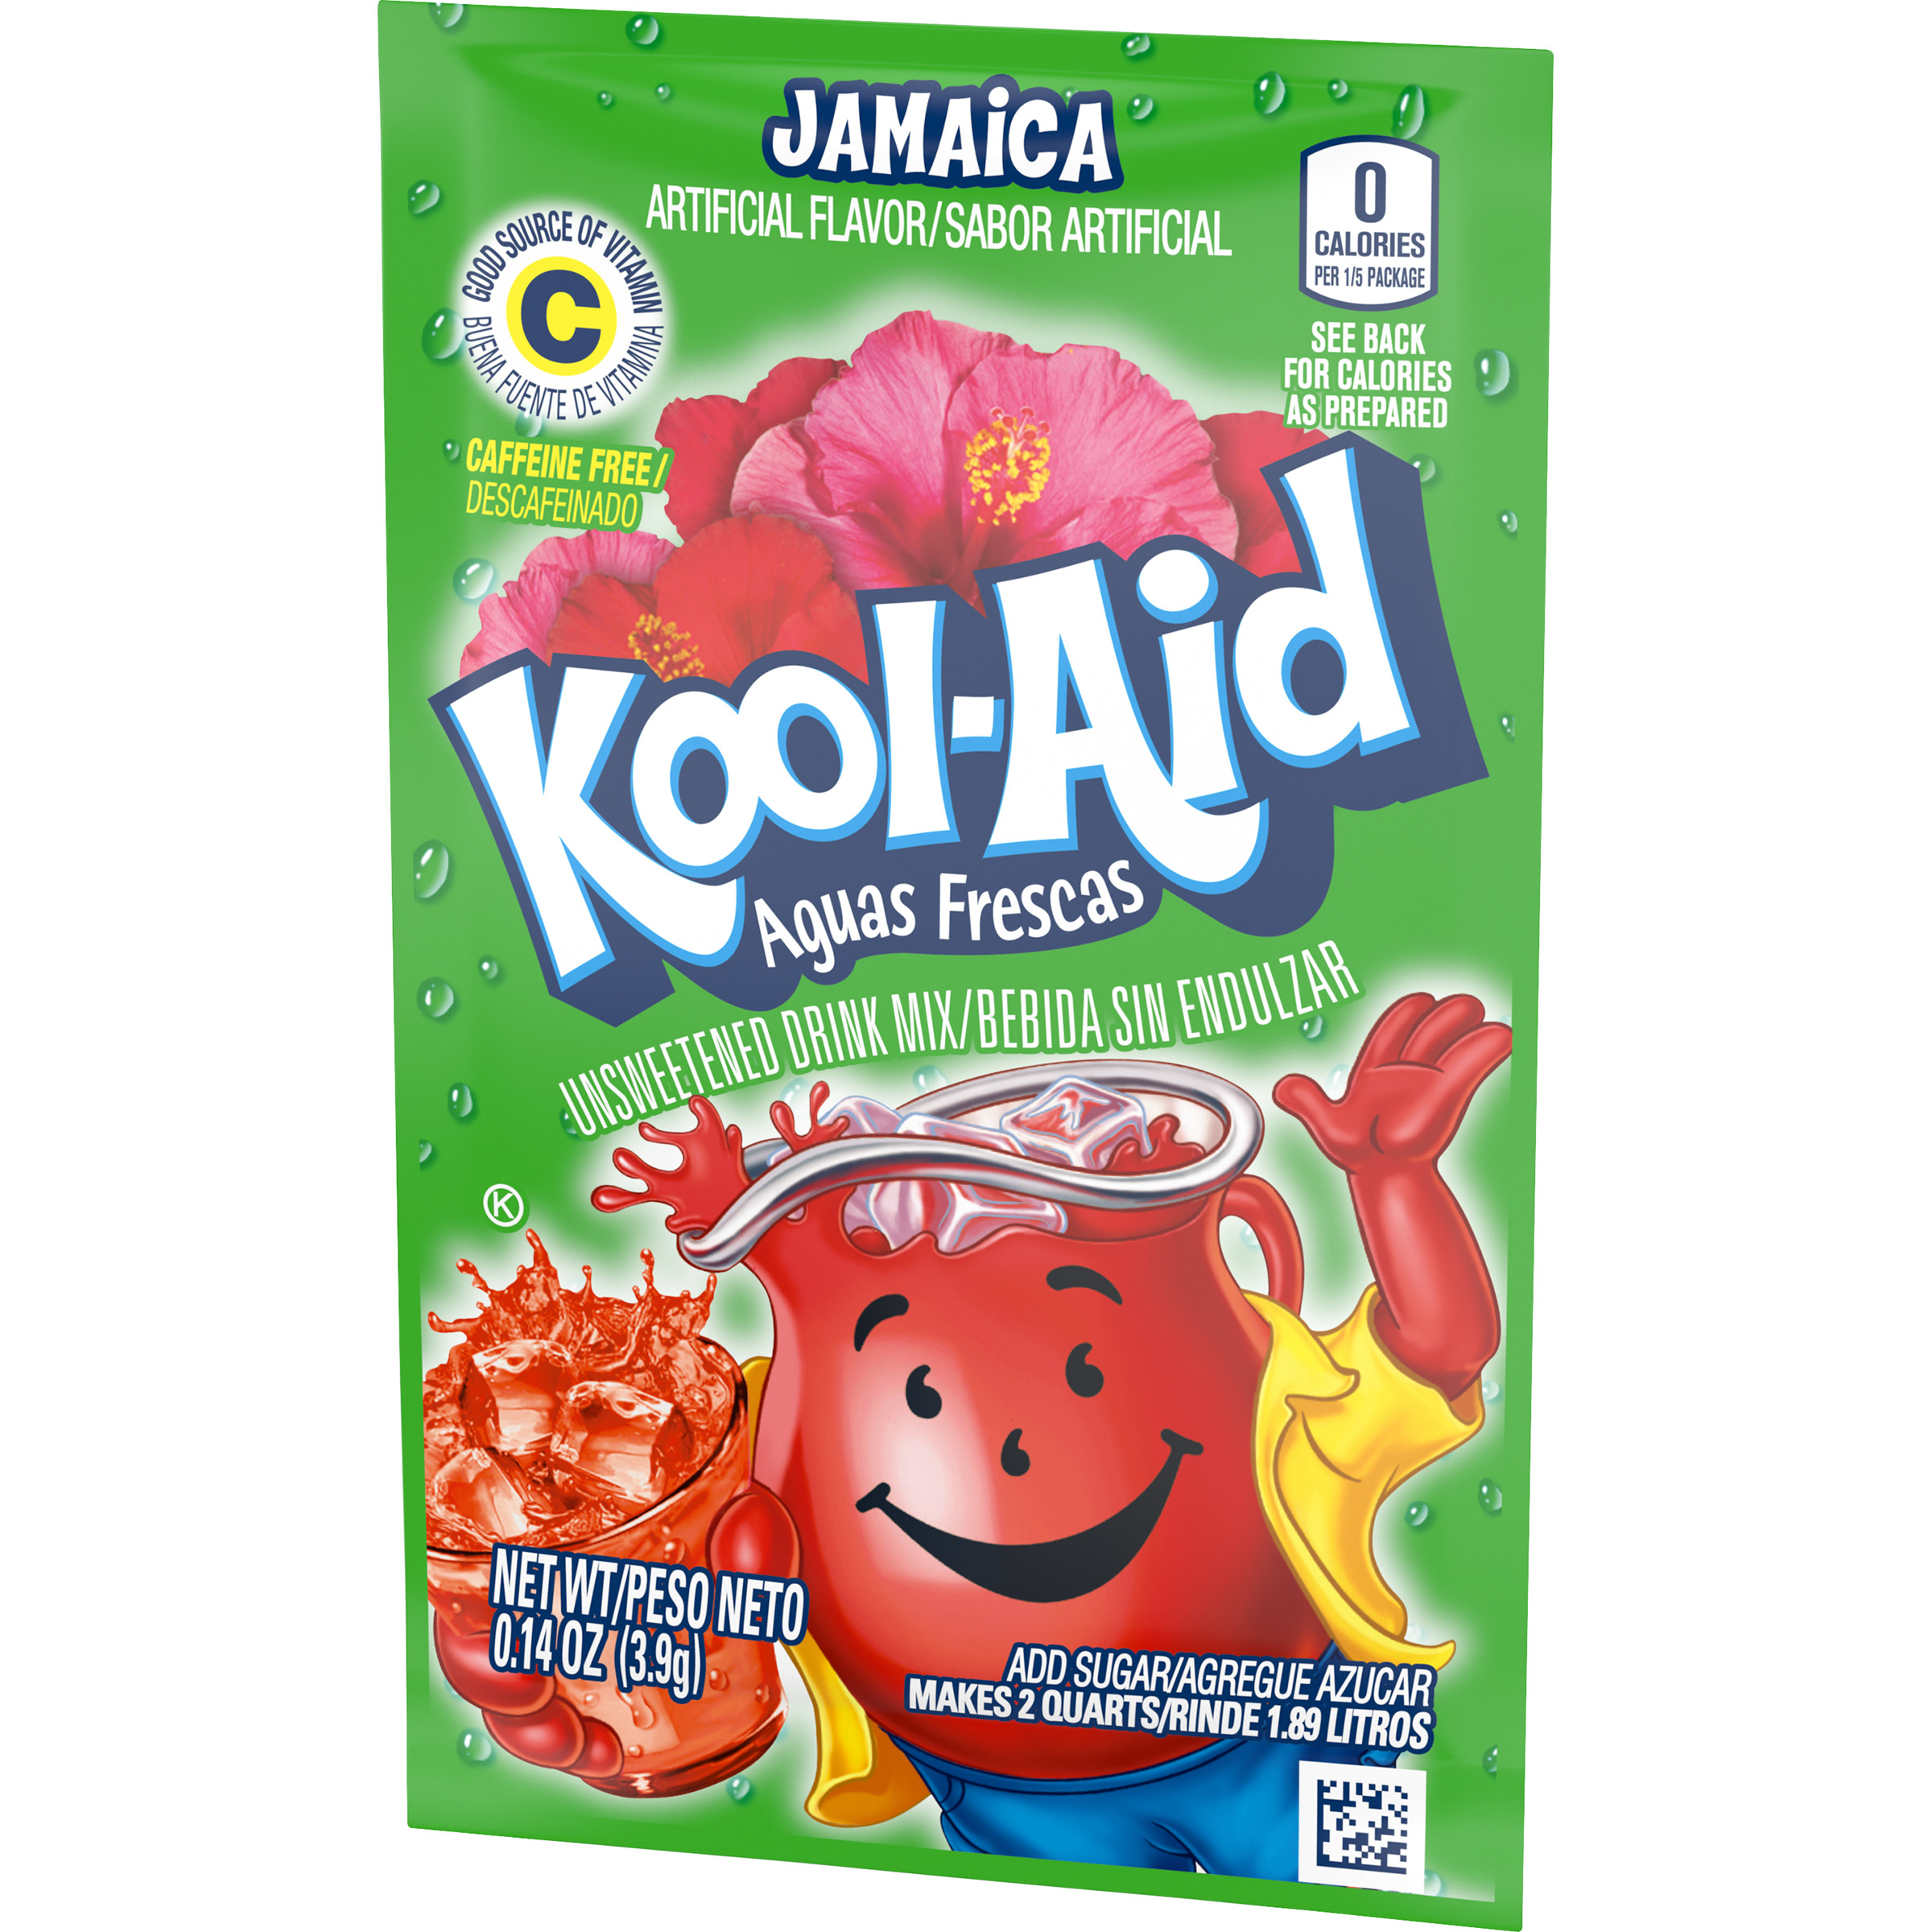 Kool-Aid Aguas Frescas Unsweetened Jamaica Artifically Flavored Powdered Soft Drink Mix, 0.14 oz Packet - image 4 of 8